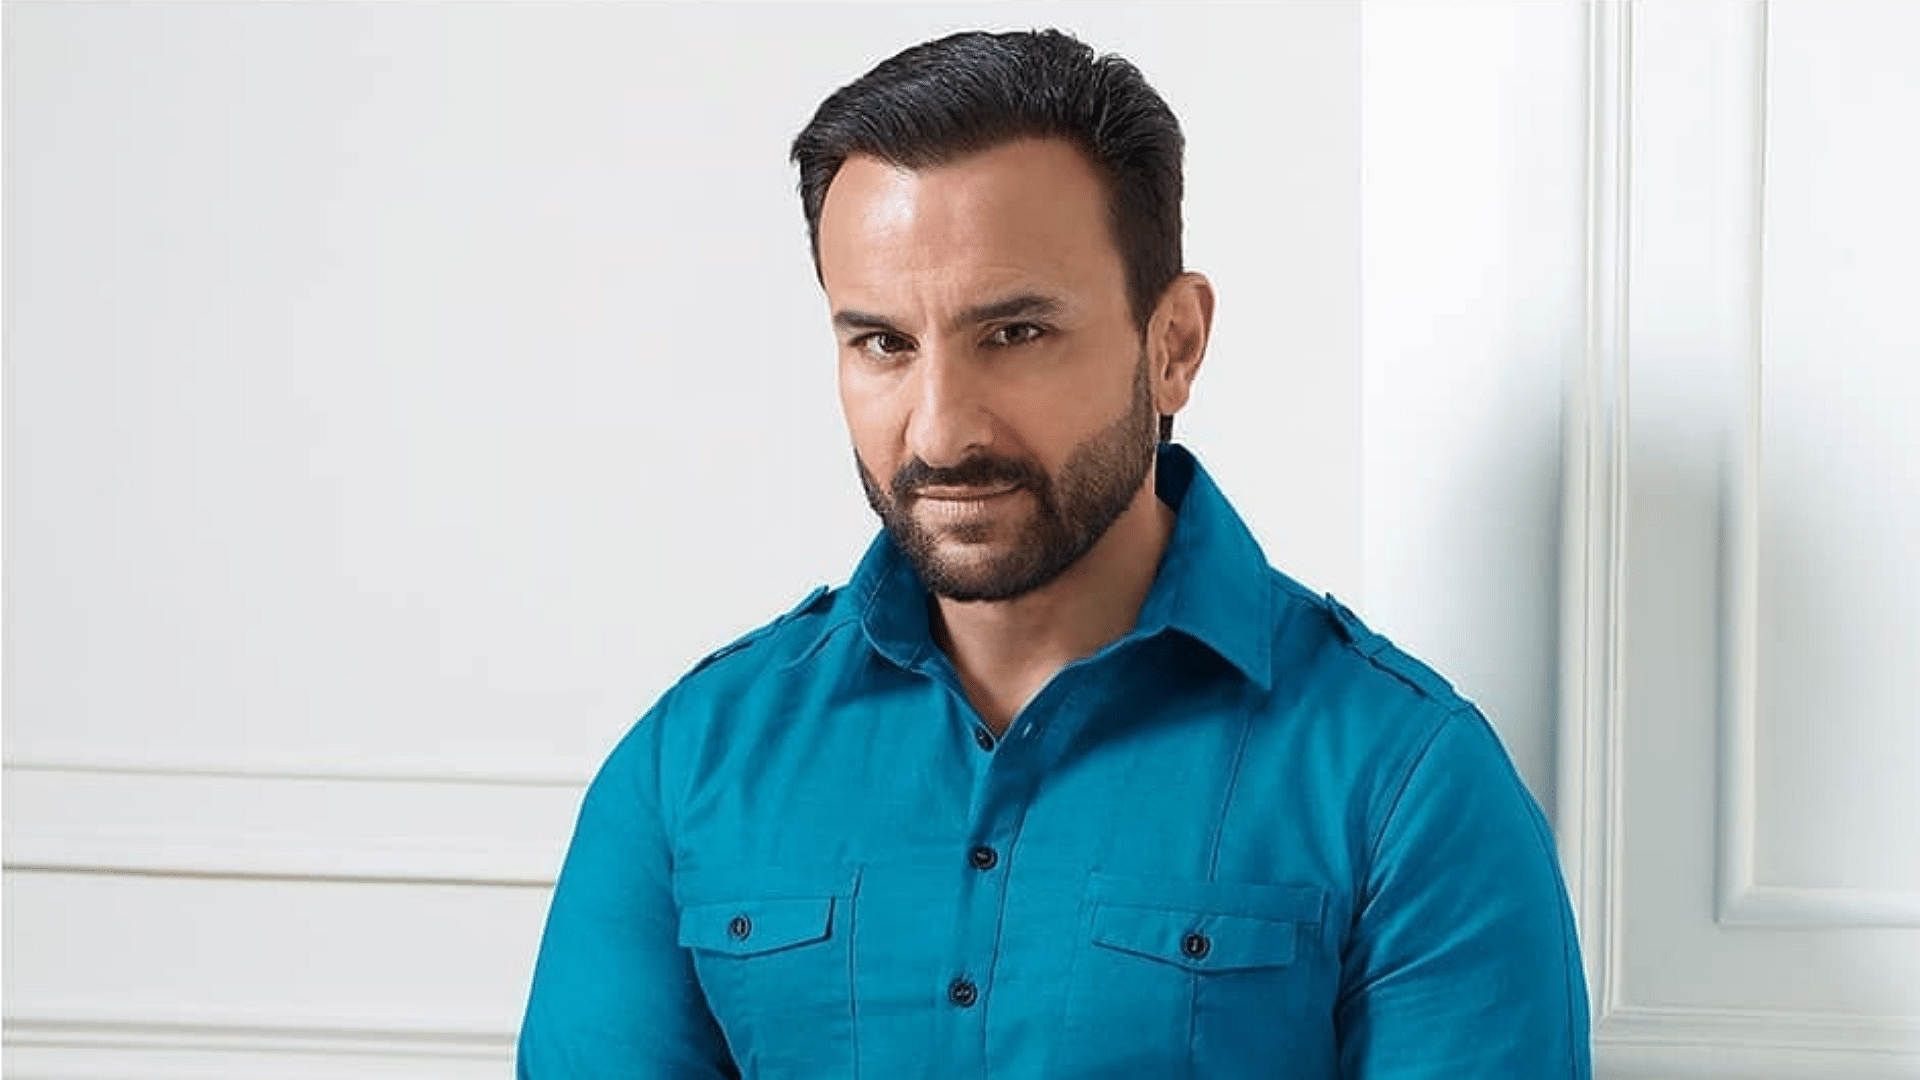 Actor Saif Ali Khan is in trouble over his comments on Raavan during an interview for <i>Adipurush</i>